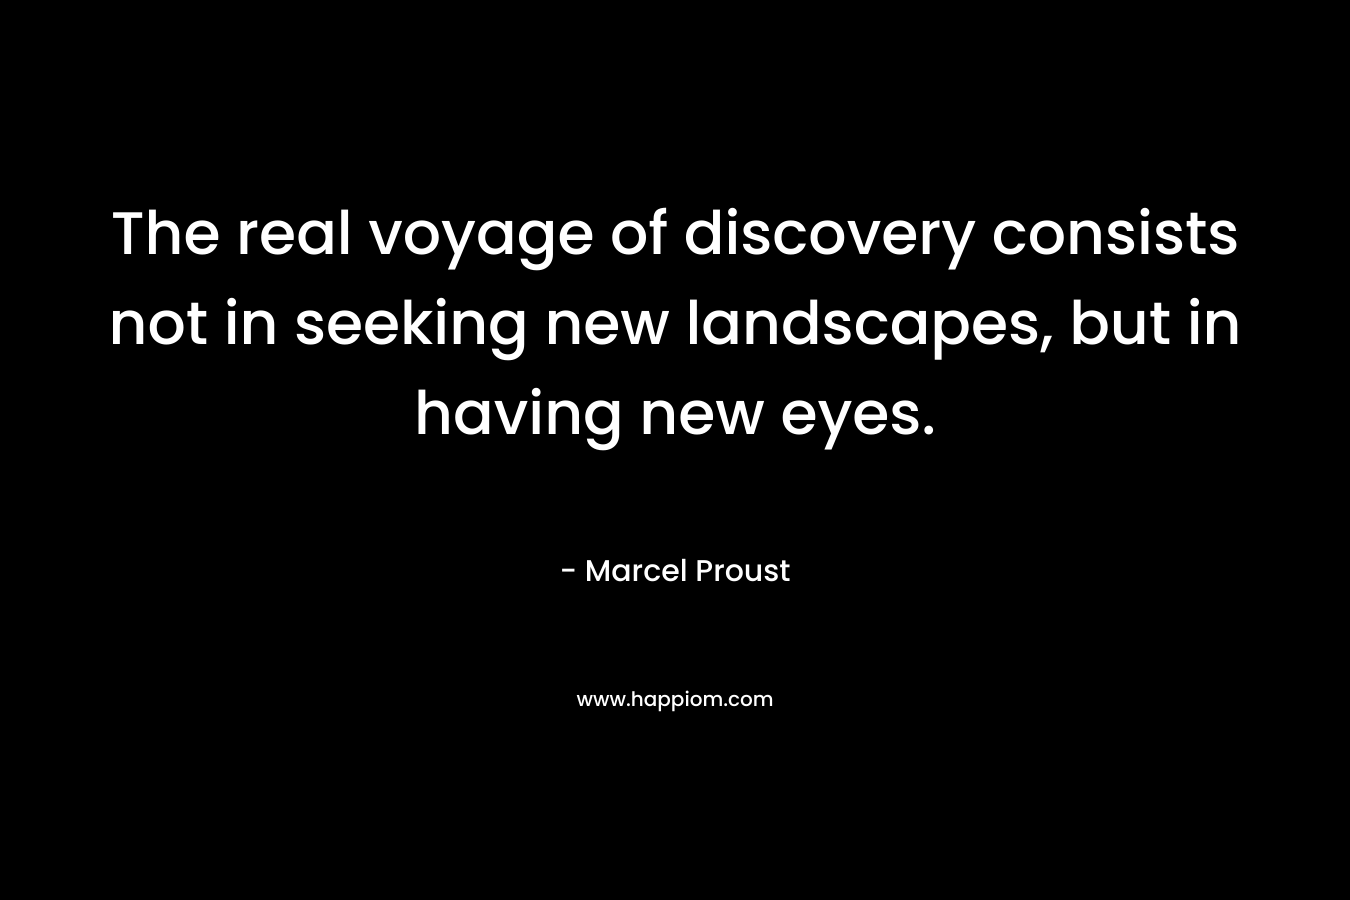 The real voyage of discovery consists not in seeking new landscapes, but in having new eyes. – Marcel Proust